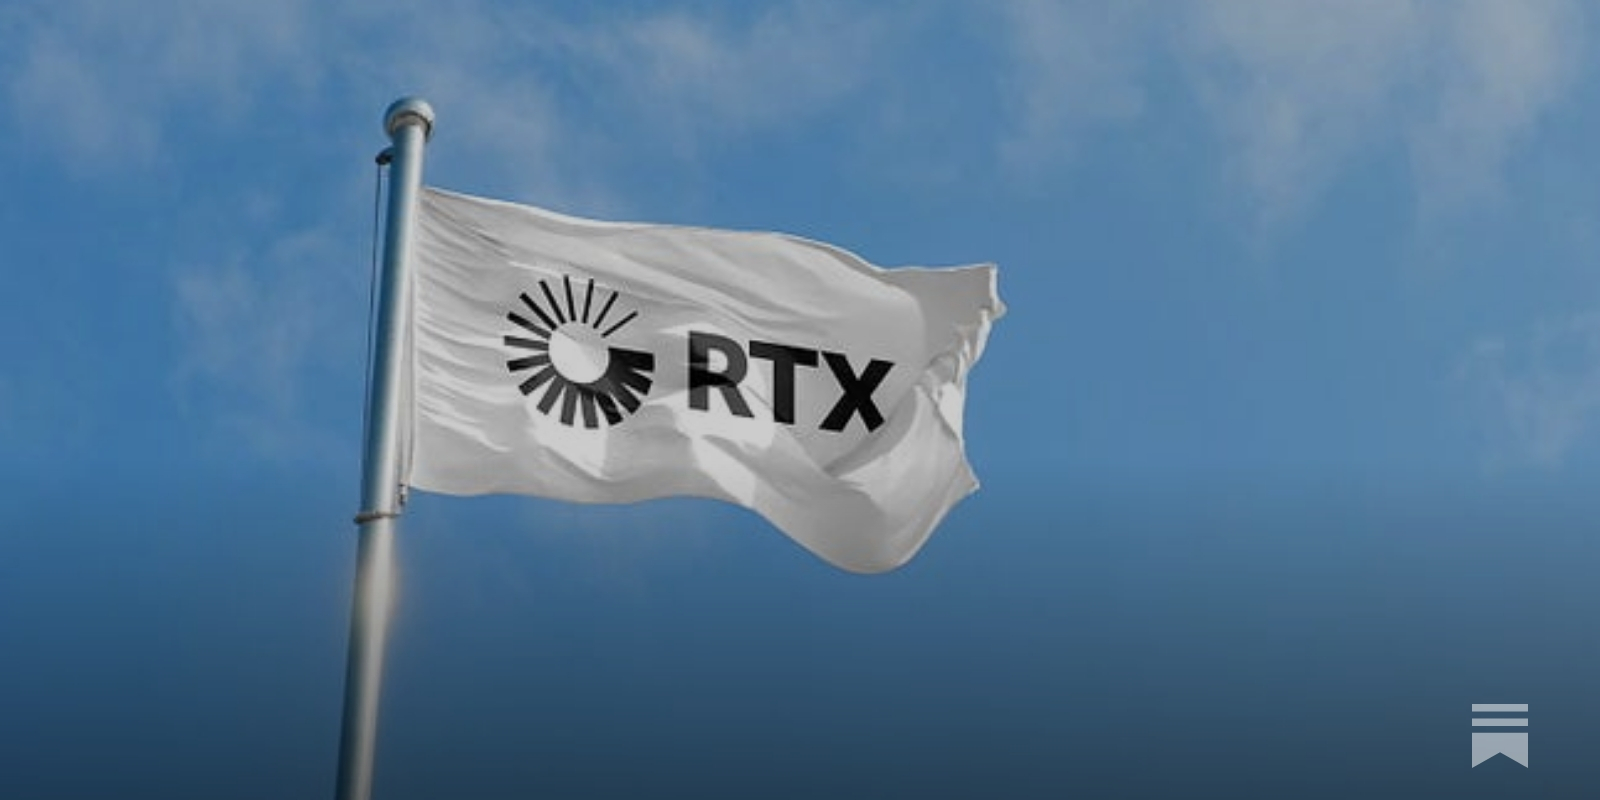 RTX to take $3 billion charge for powder-metal condition in some